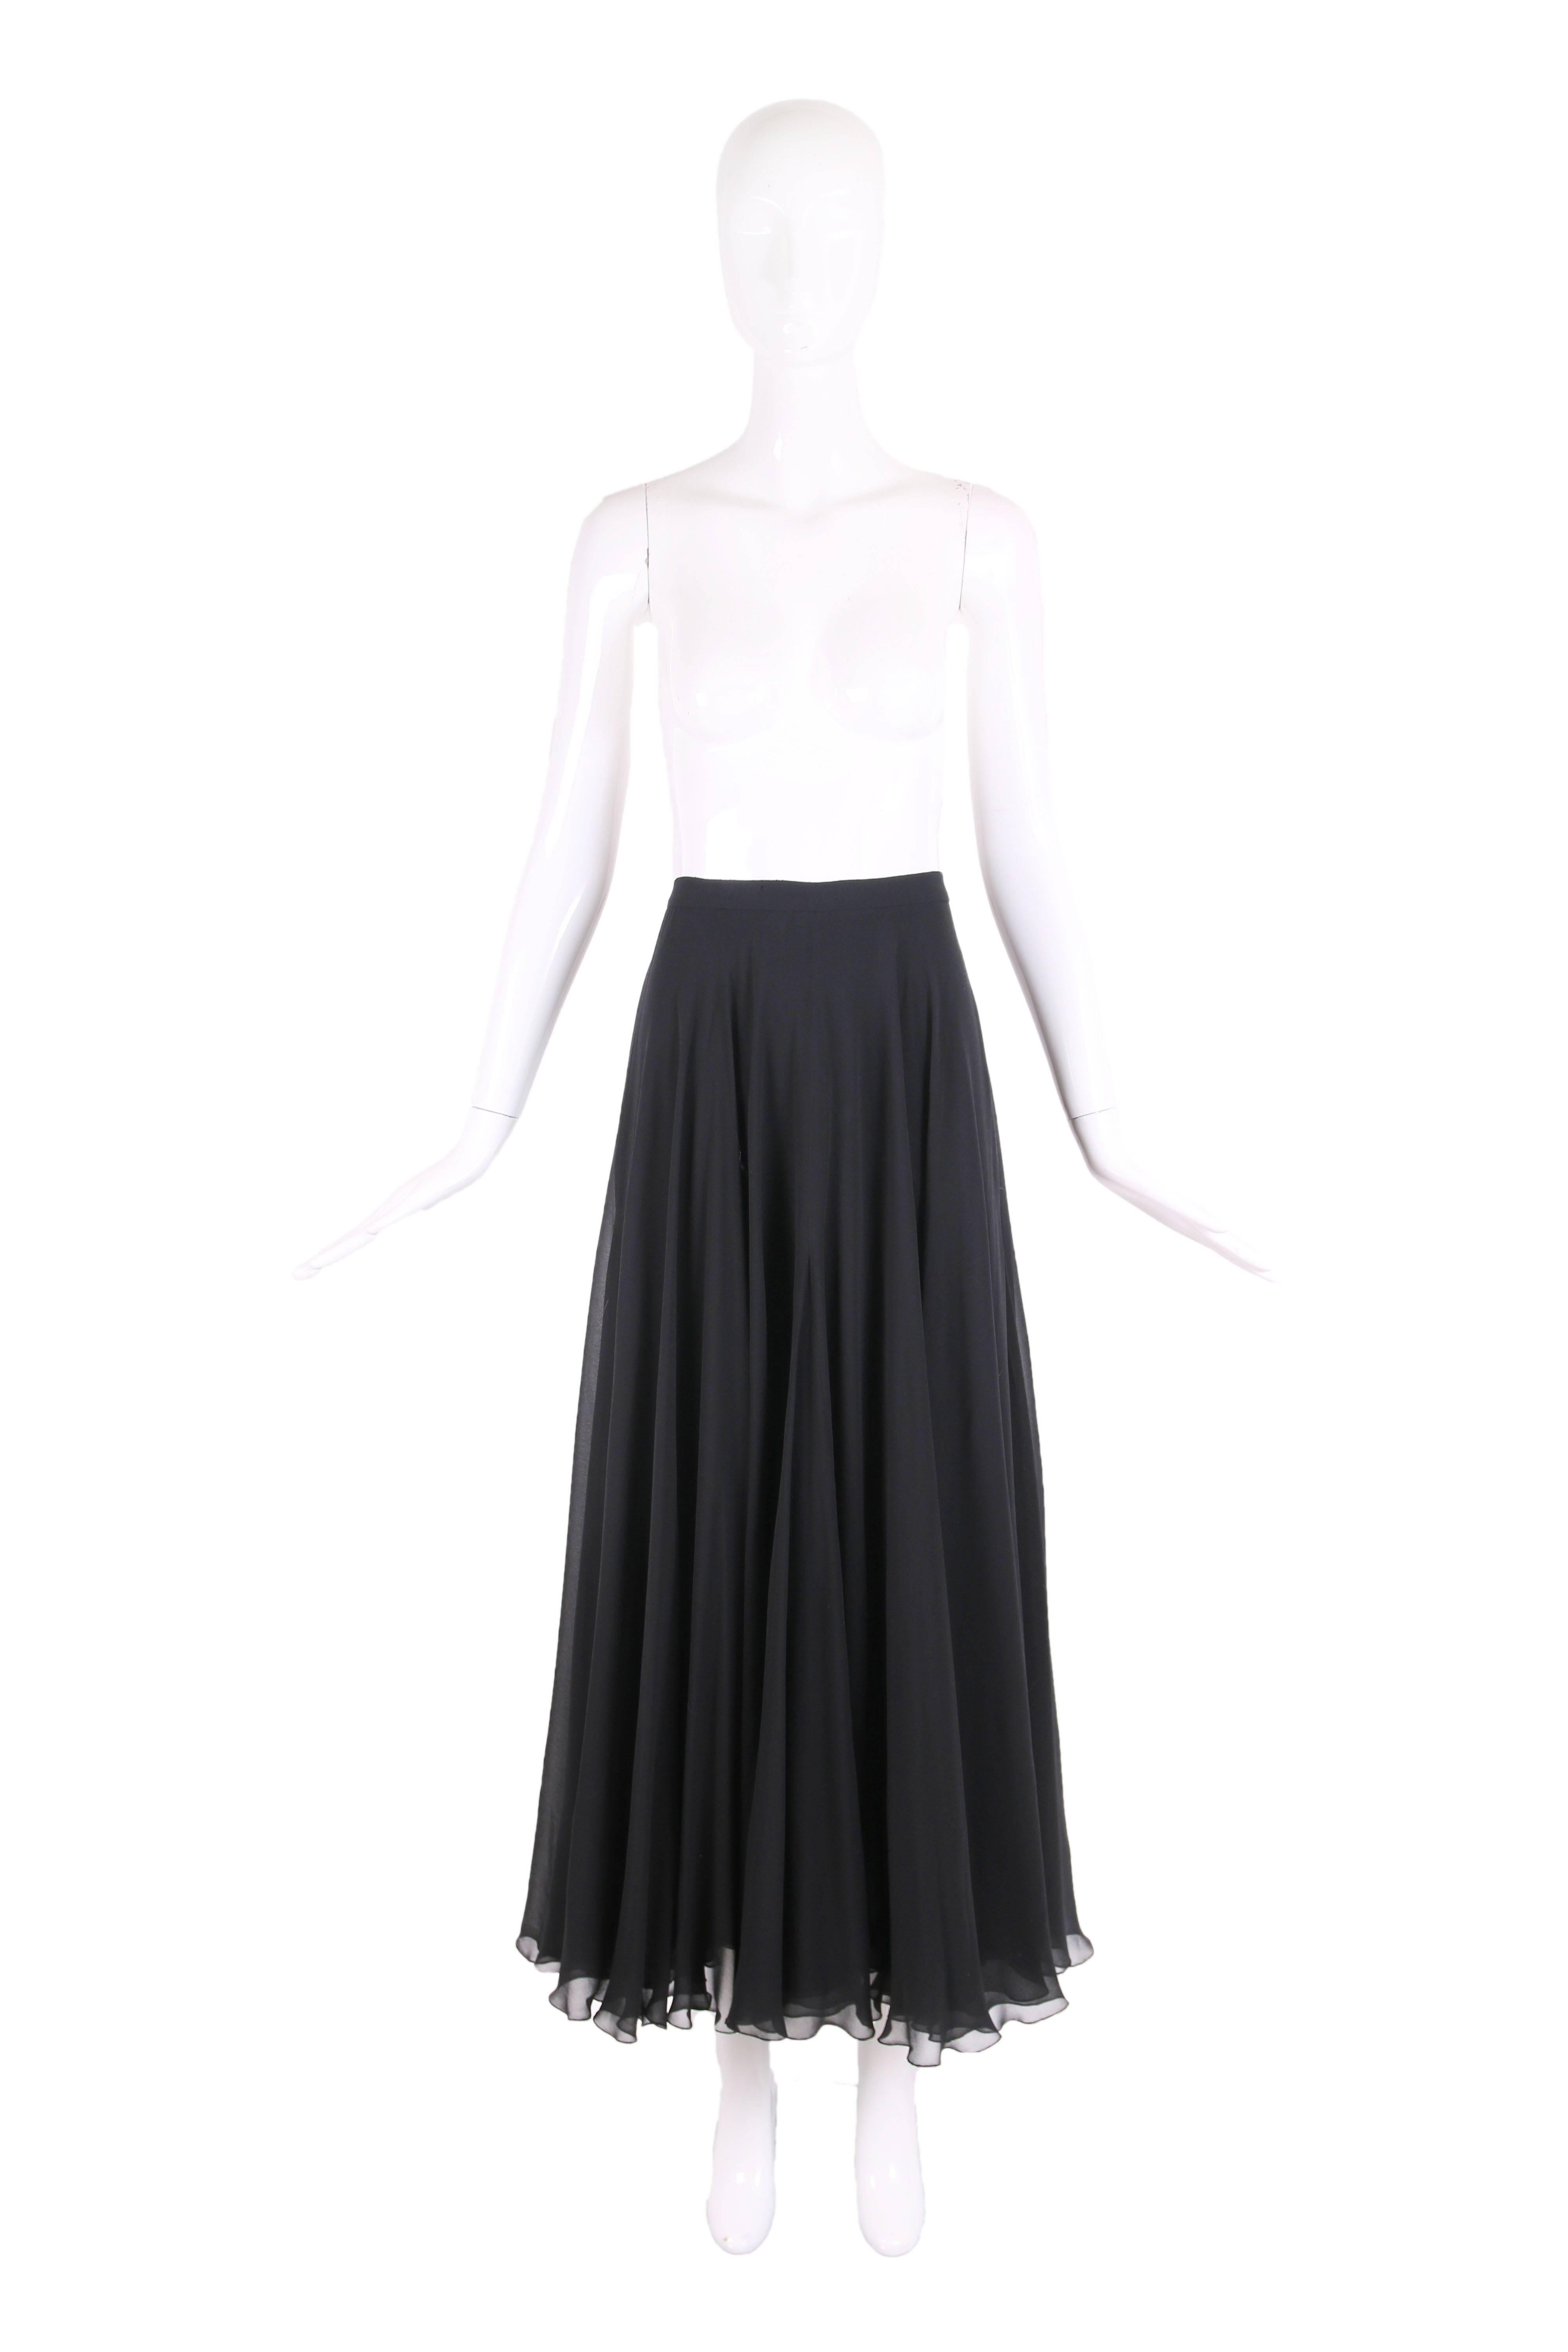 1993 Chanel black silk chiffon triple layered flared maxi skirt w/gold tone CC logo button at waist and side zipper closure. In very good to excellent condition with three tiny nicks in the fabric at the waist band in one small area. Missing the